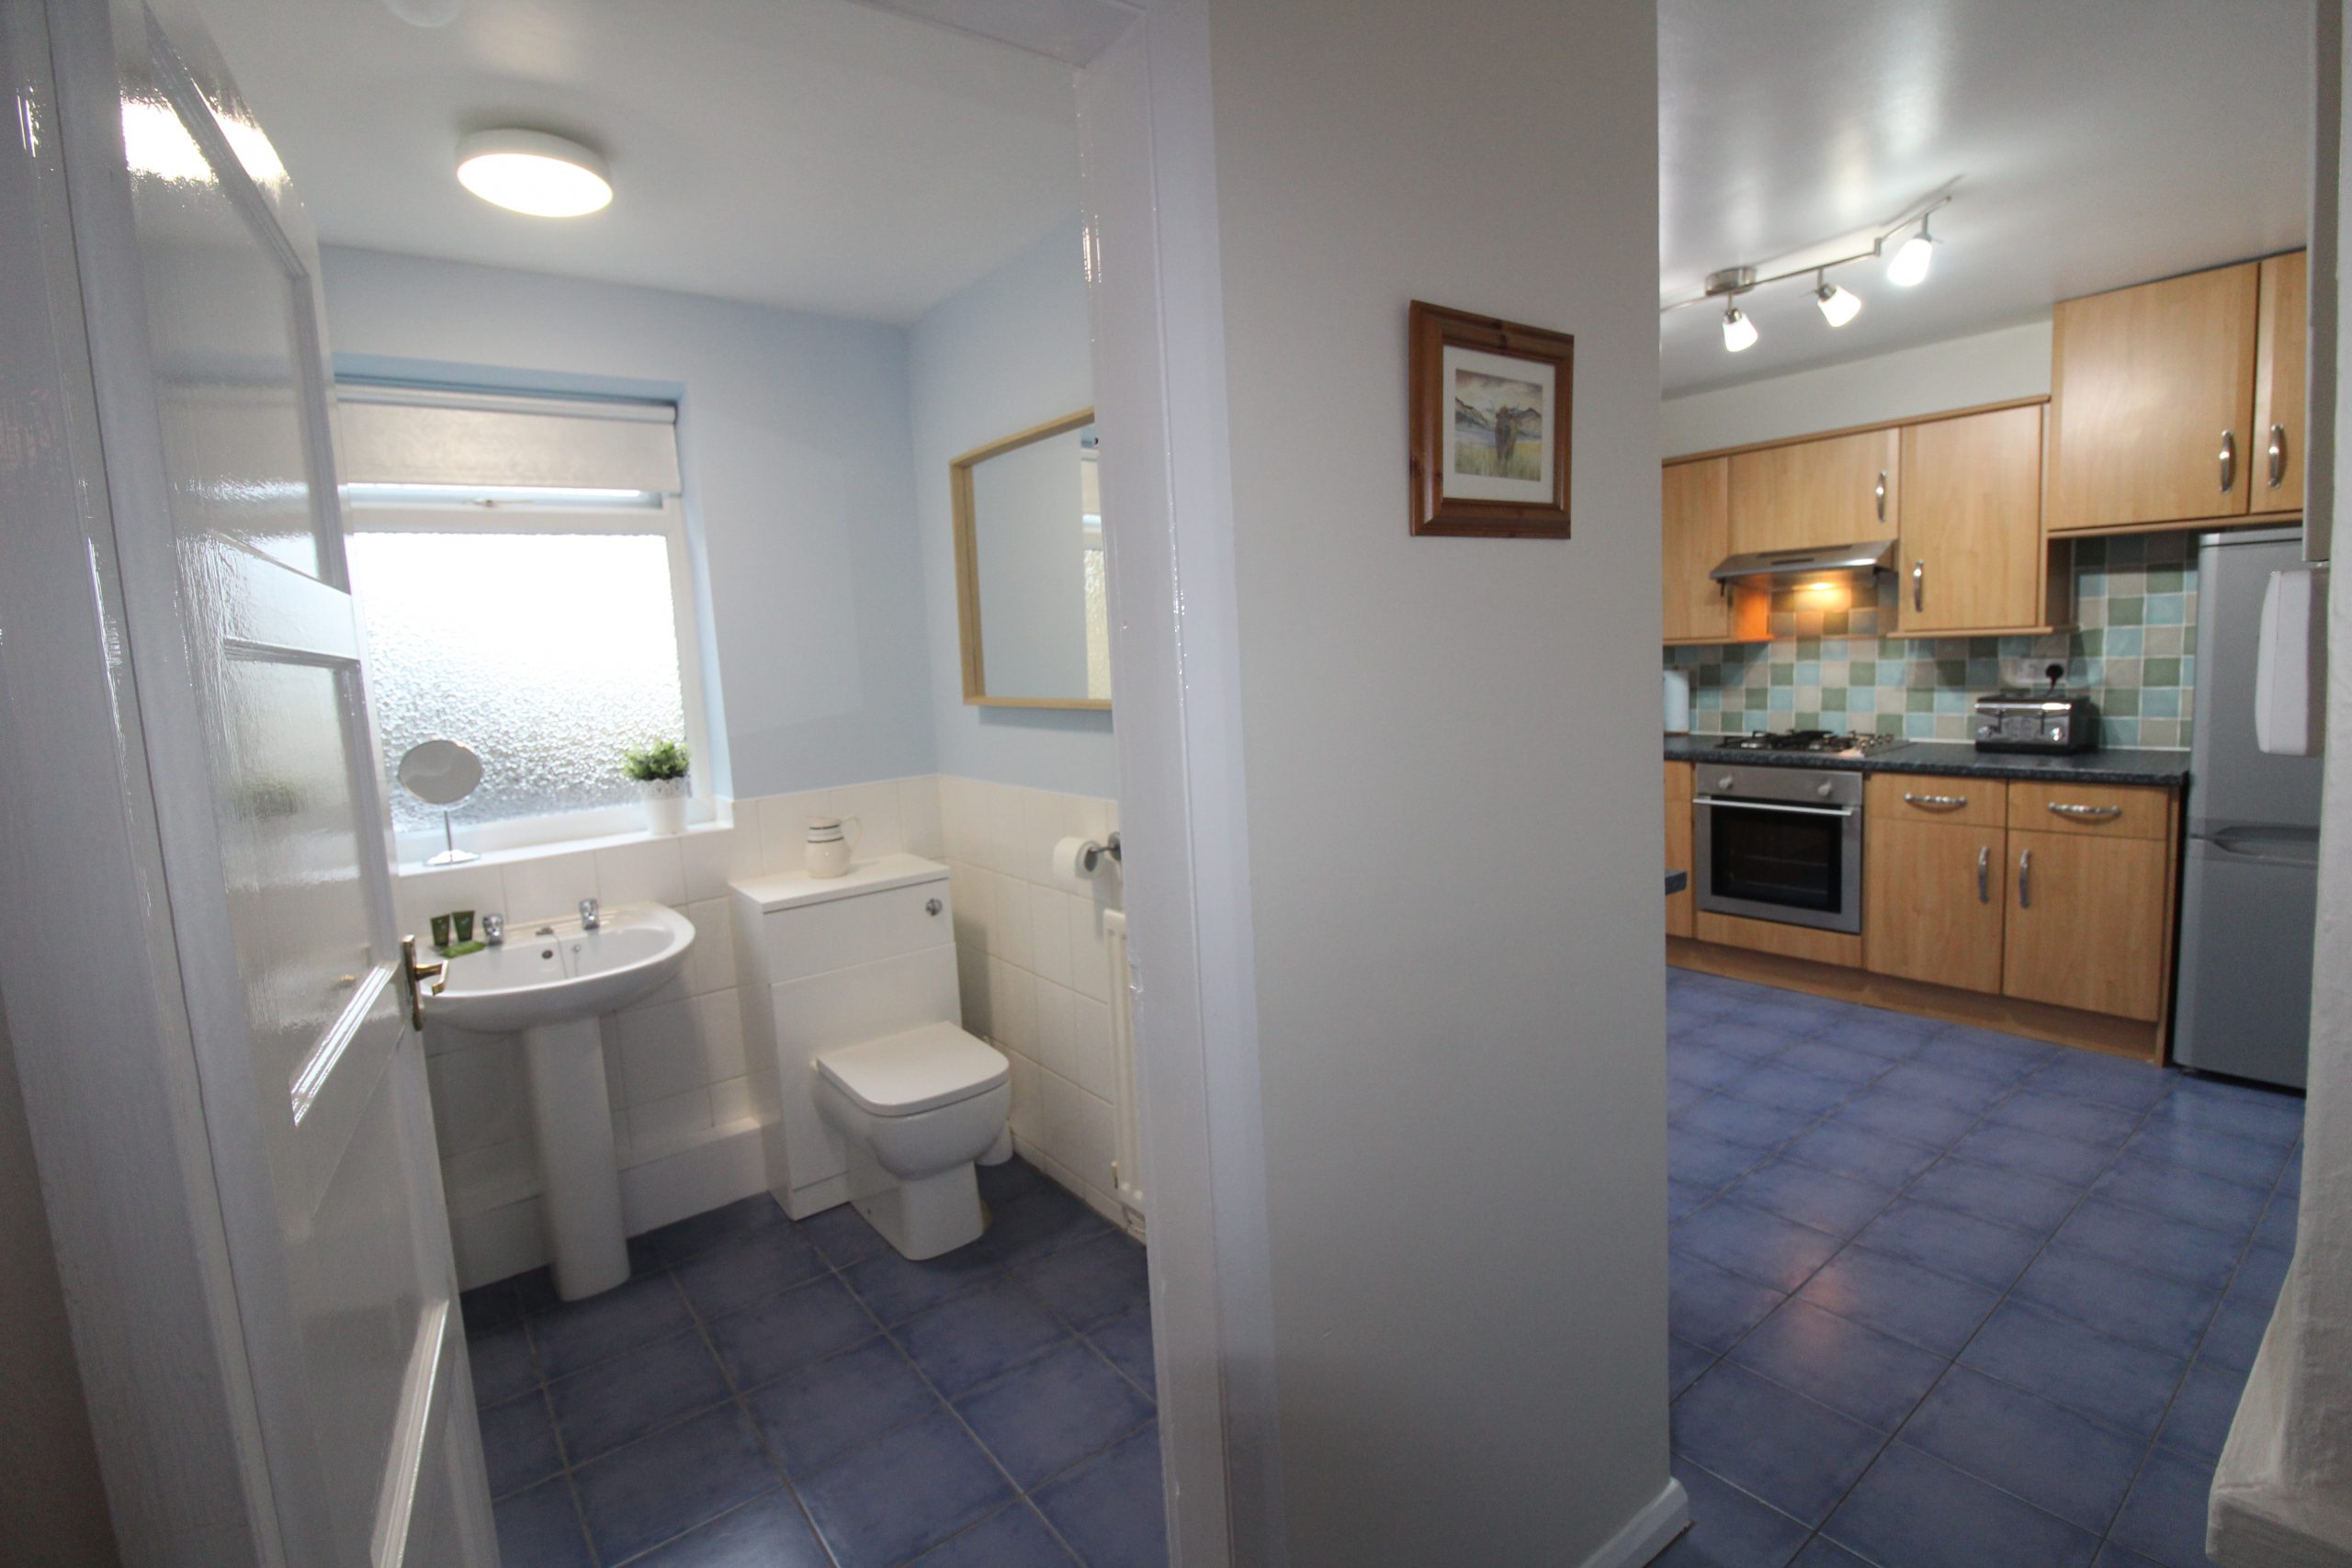 No 3 Farm Cottage - Downstairs Bathroom and Kitchen